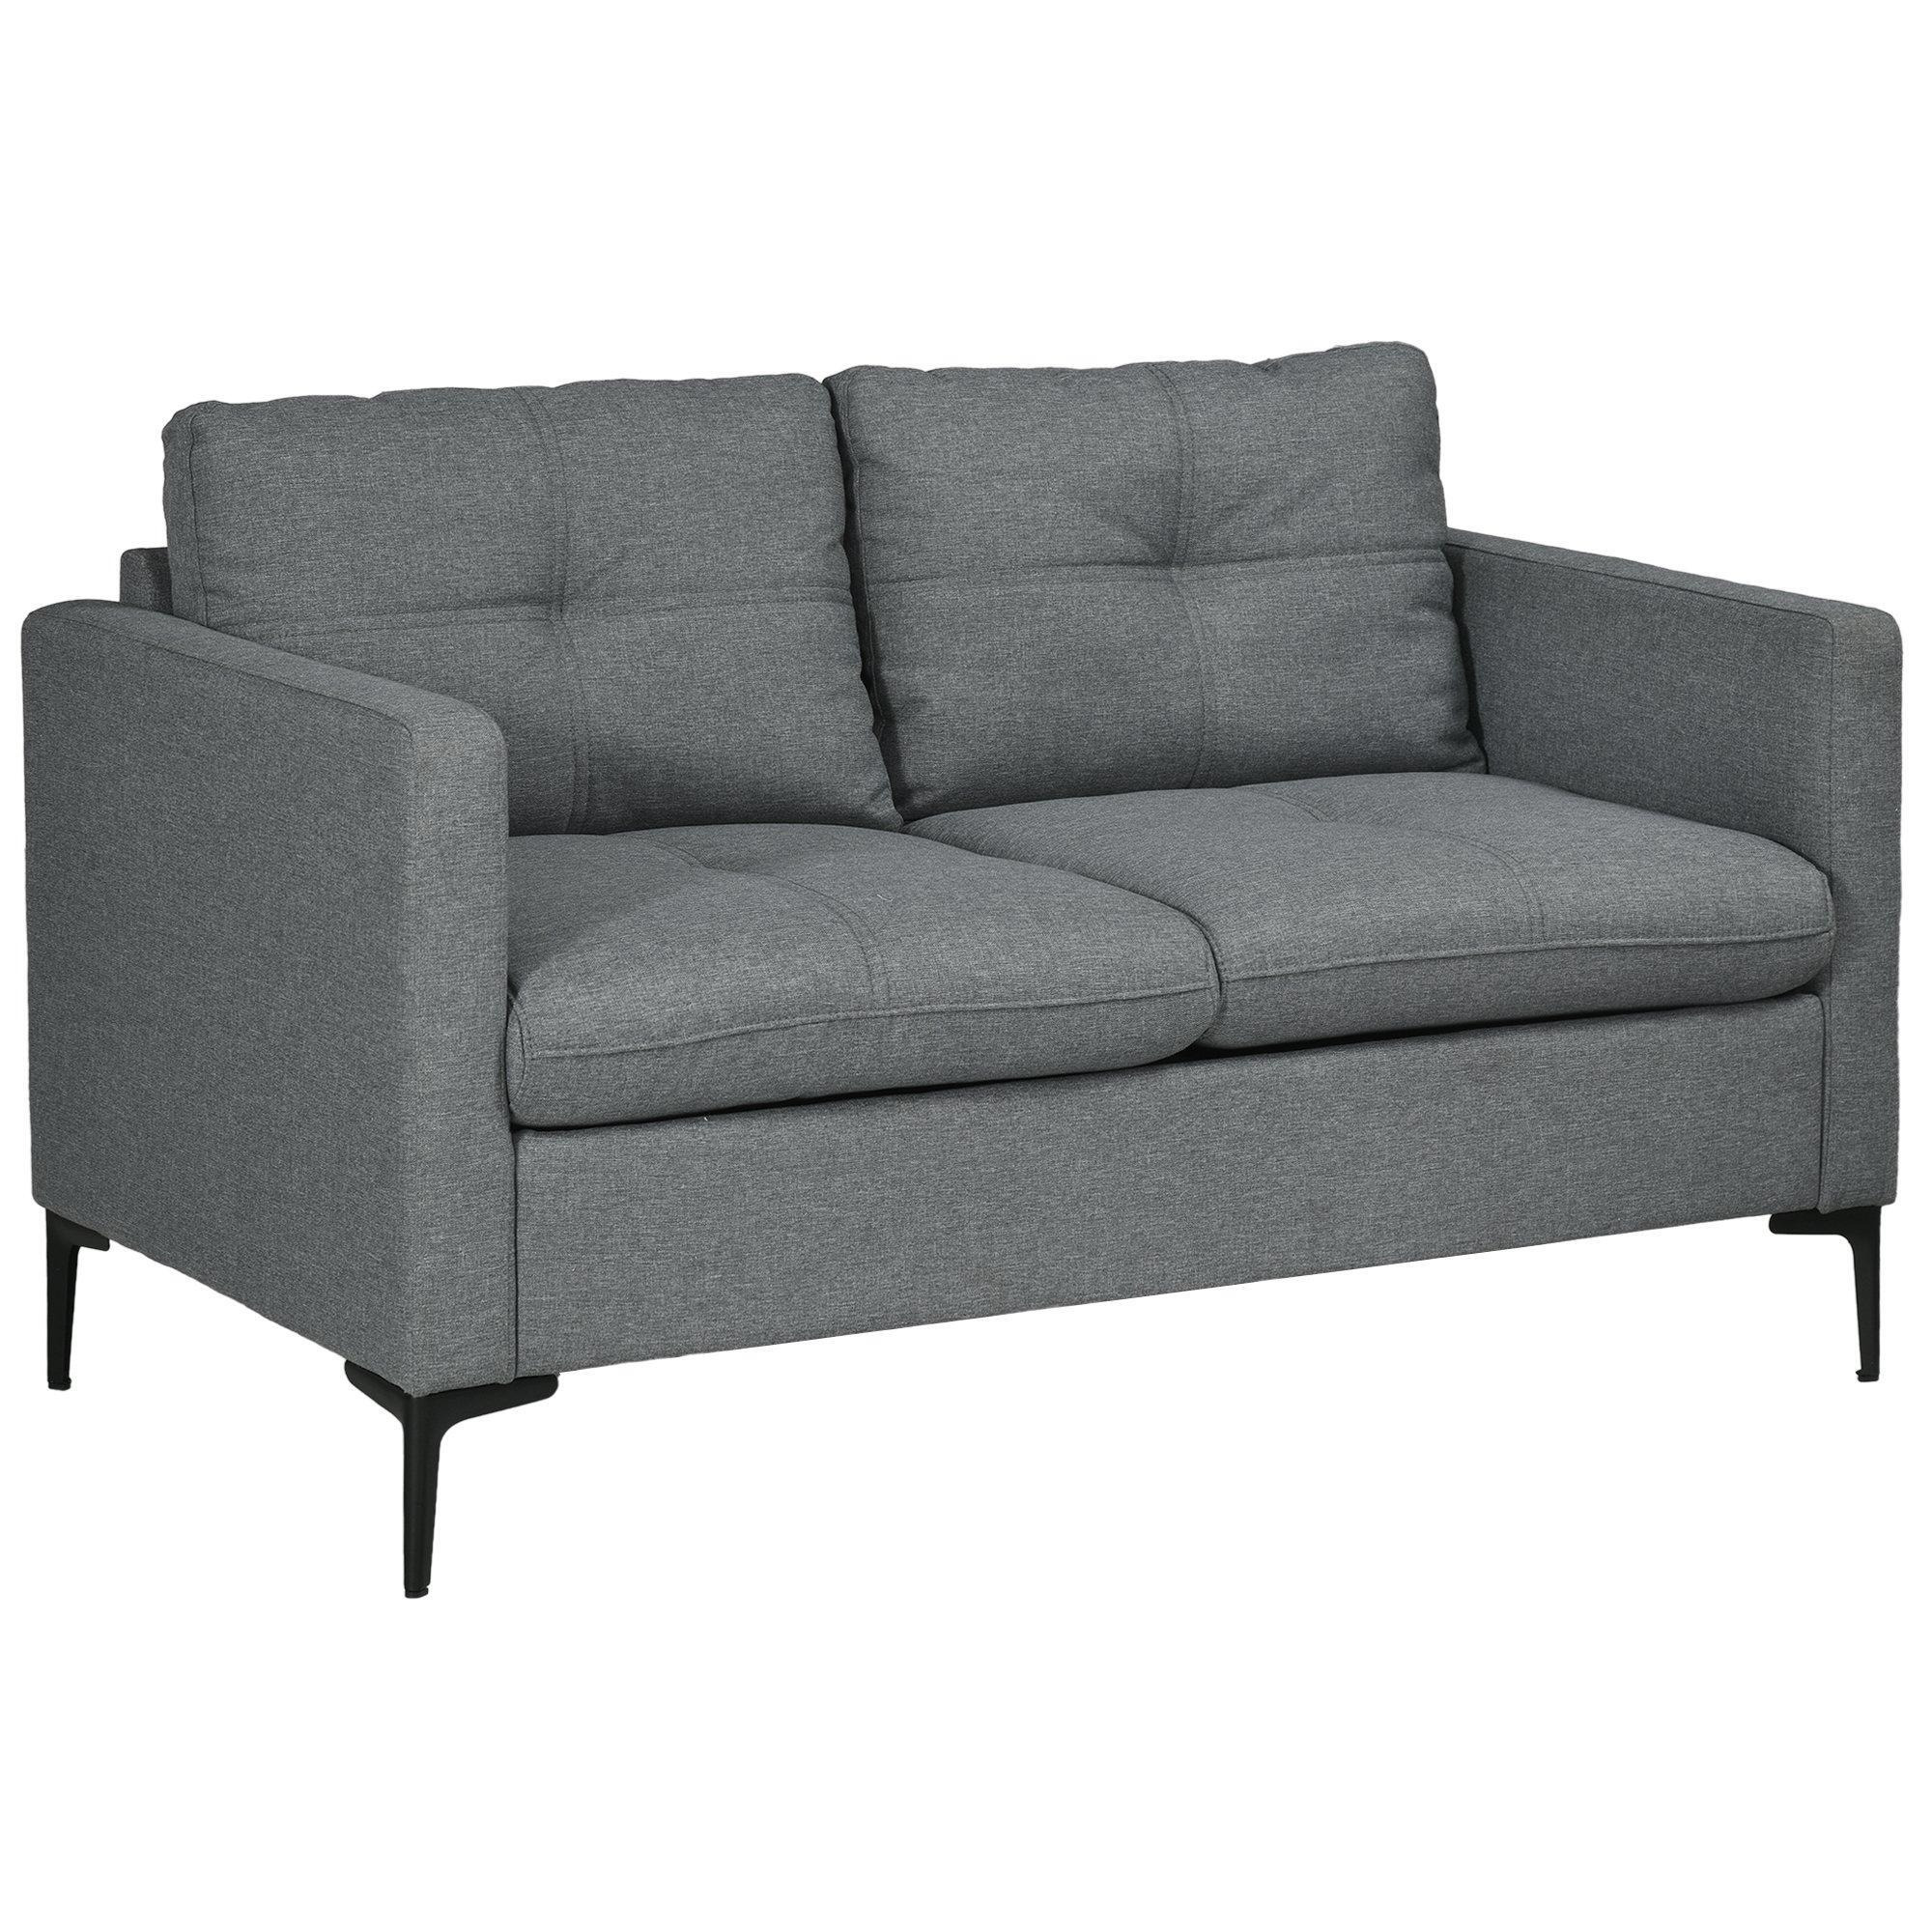 133cm 2 Seater Sofa for Living Room Loveseat Sofa with Steel Legs - image 1